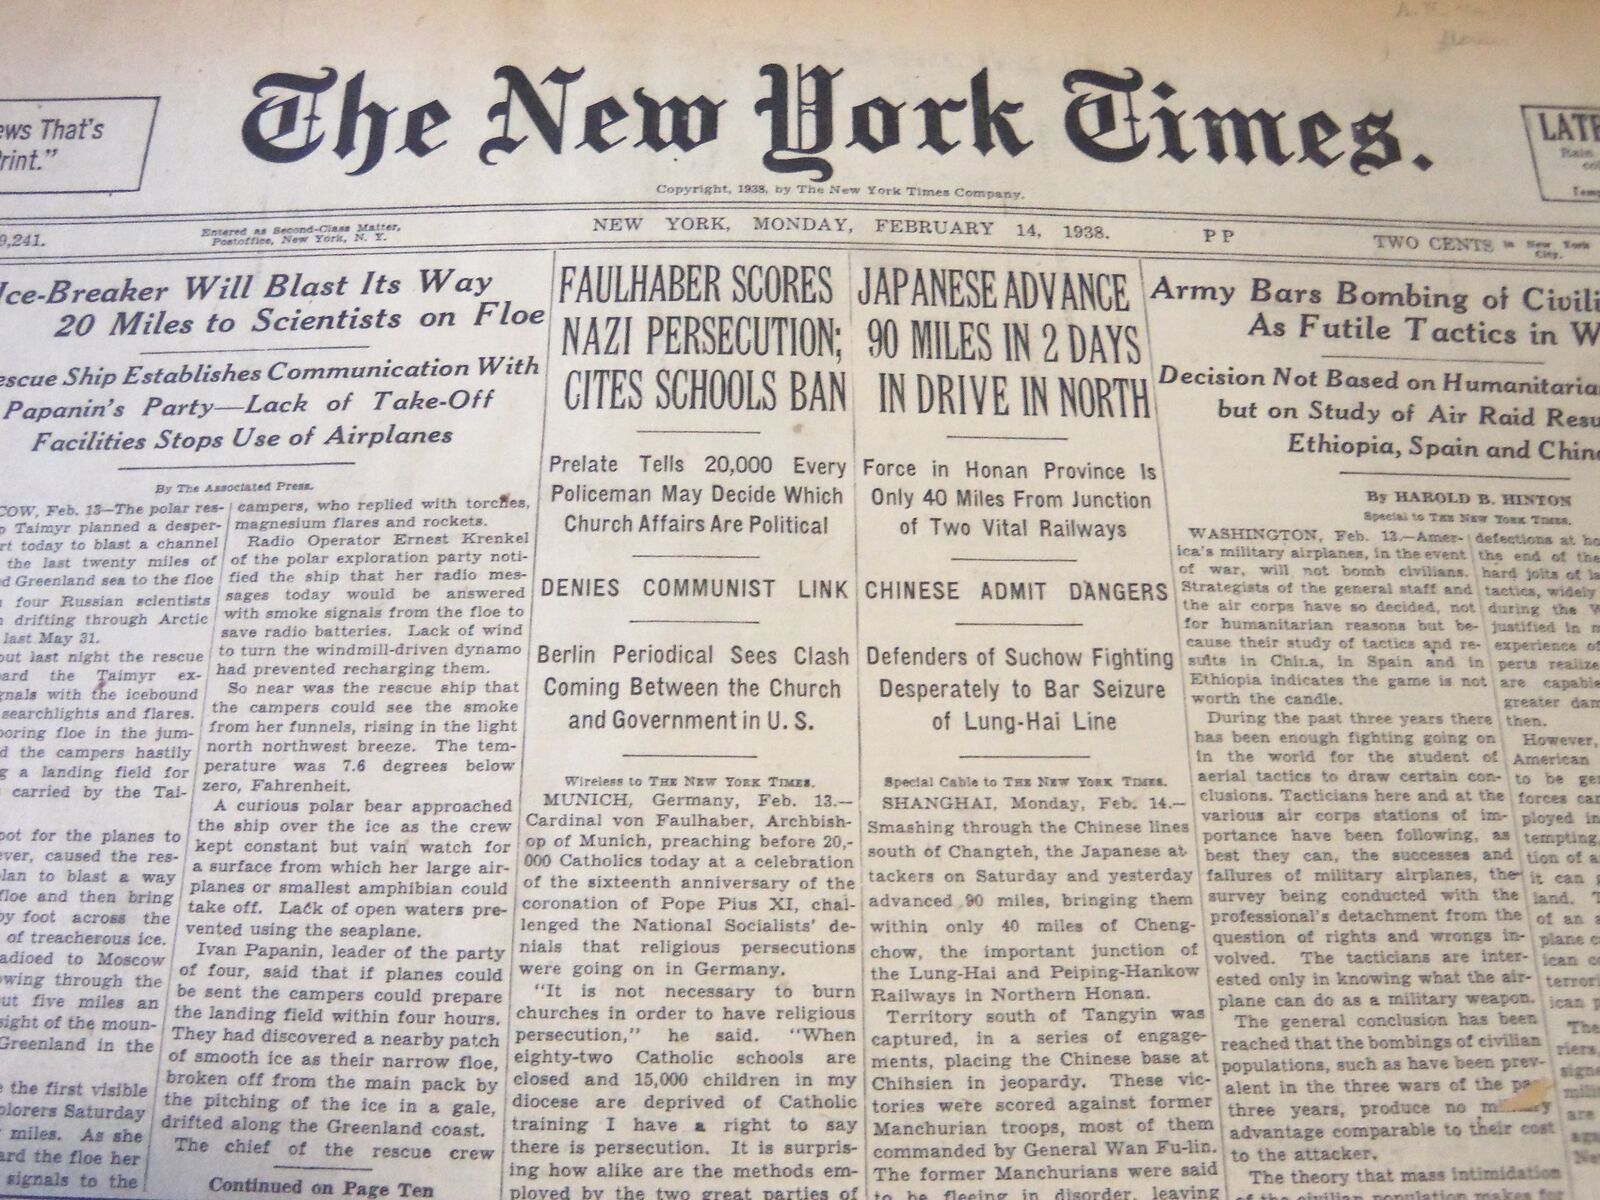 1938 FEBRUARY 14 NEW YORK TIMES - CARDINAL FAULHABER SCORES PERSECUTION- NT 6252